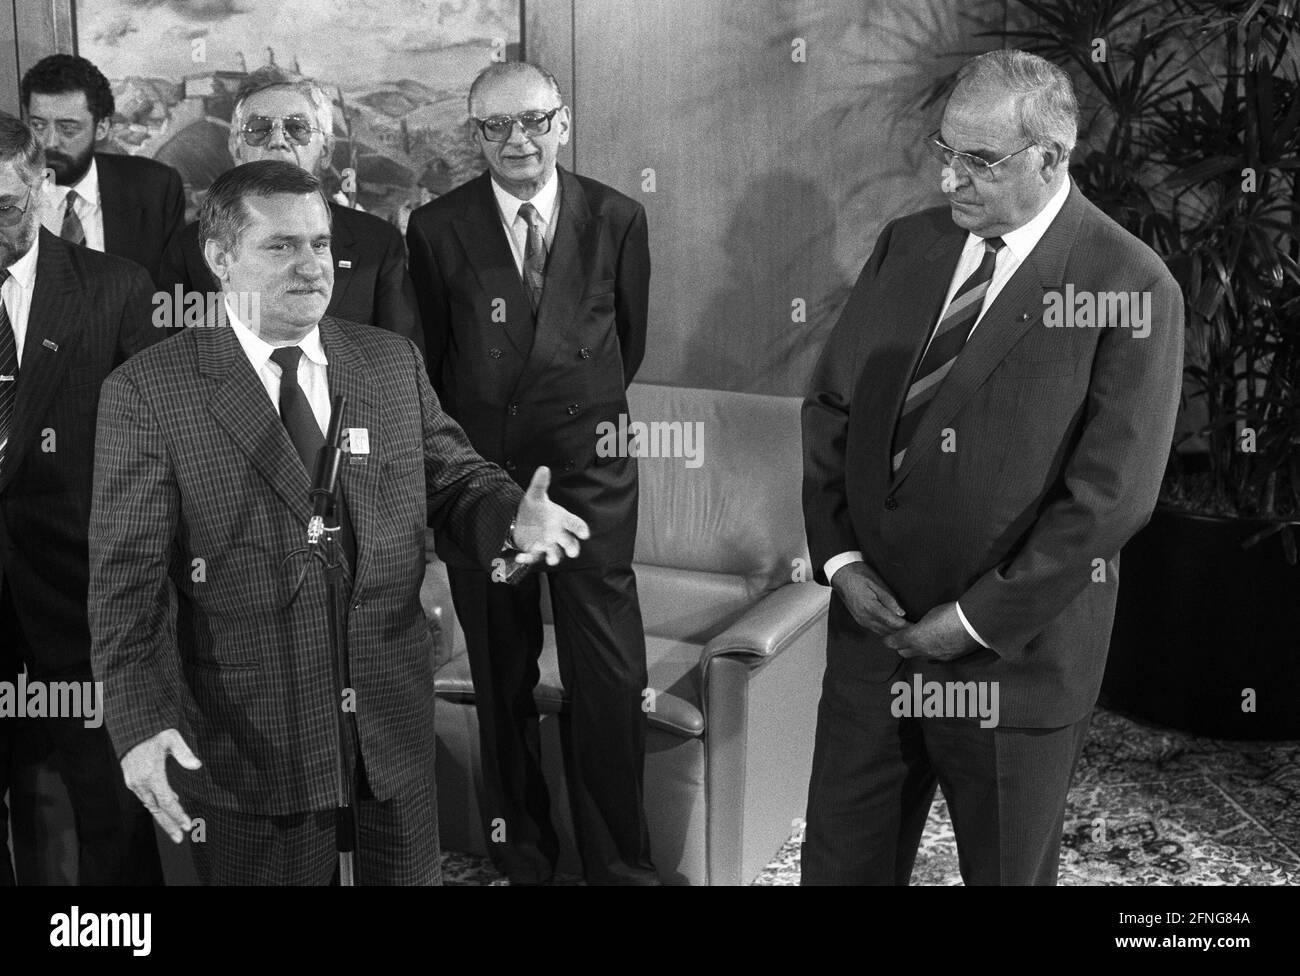 Germany, Bonn, 07.09.1989. Archive No: 08-20-27 Visit of Lech Walesa, Chairman of the Solidarno?? trade union Photo: Lech Walesa and Chancellor Helmut Kohl at the Chancellery. [automated translation] Stock Photo